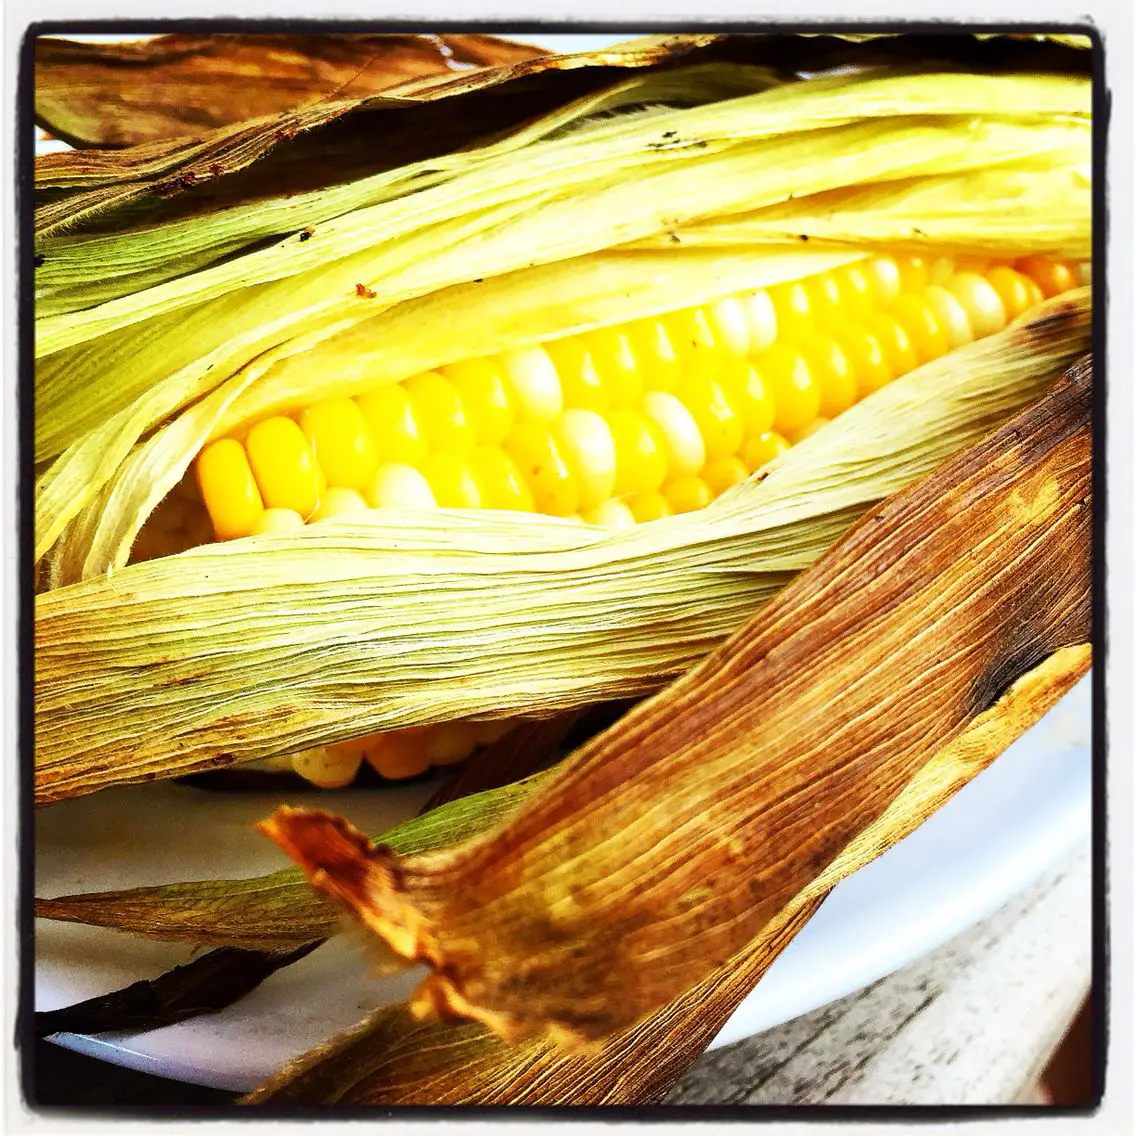 Grilled corn roasted in its own husks.